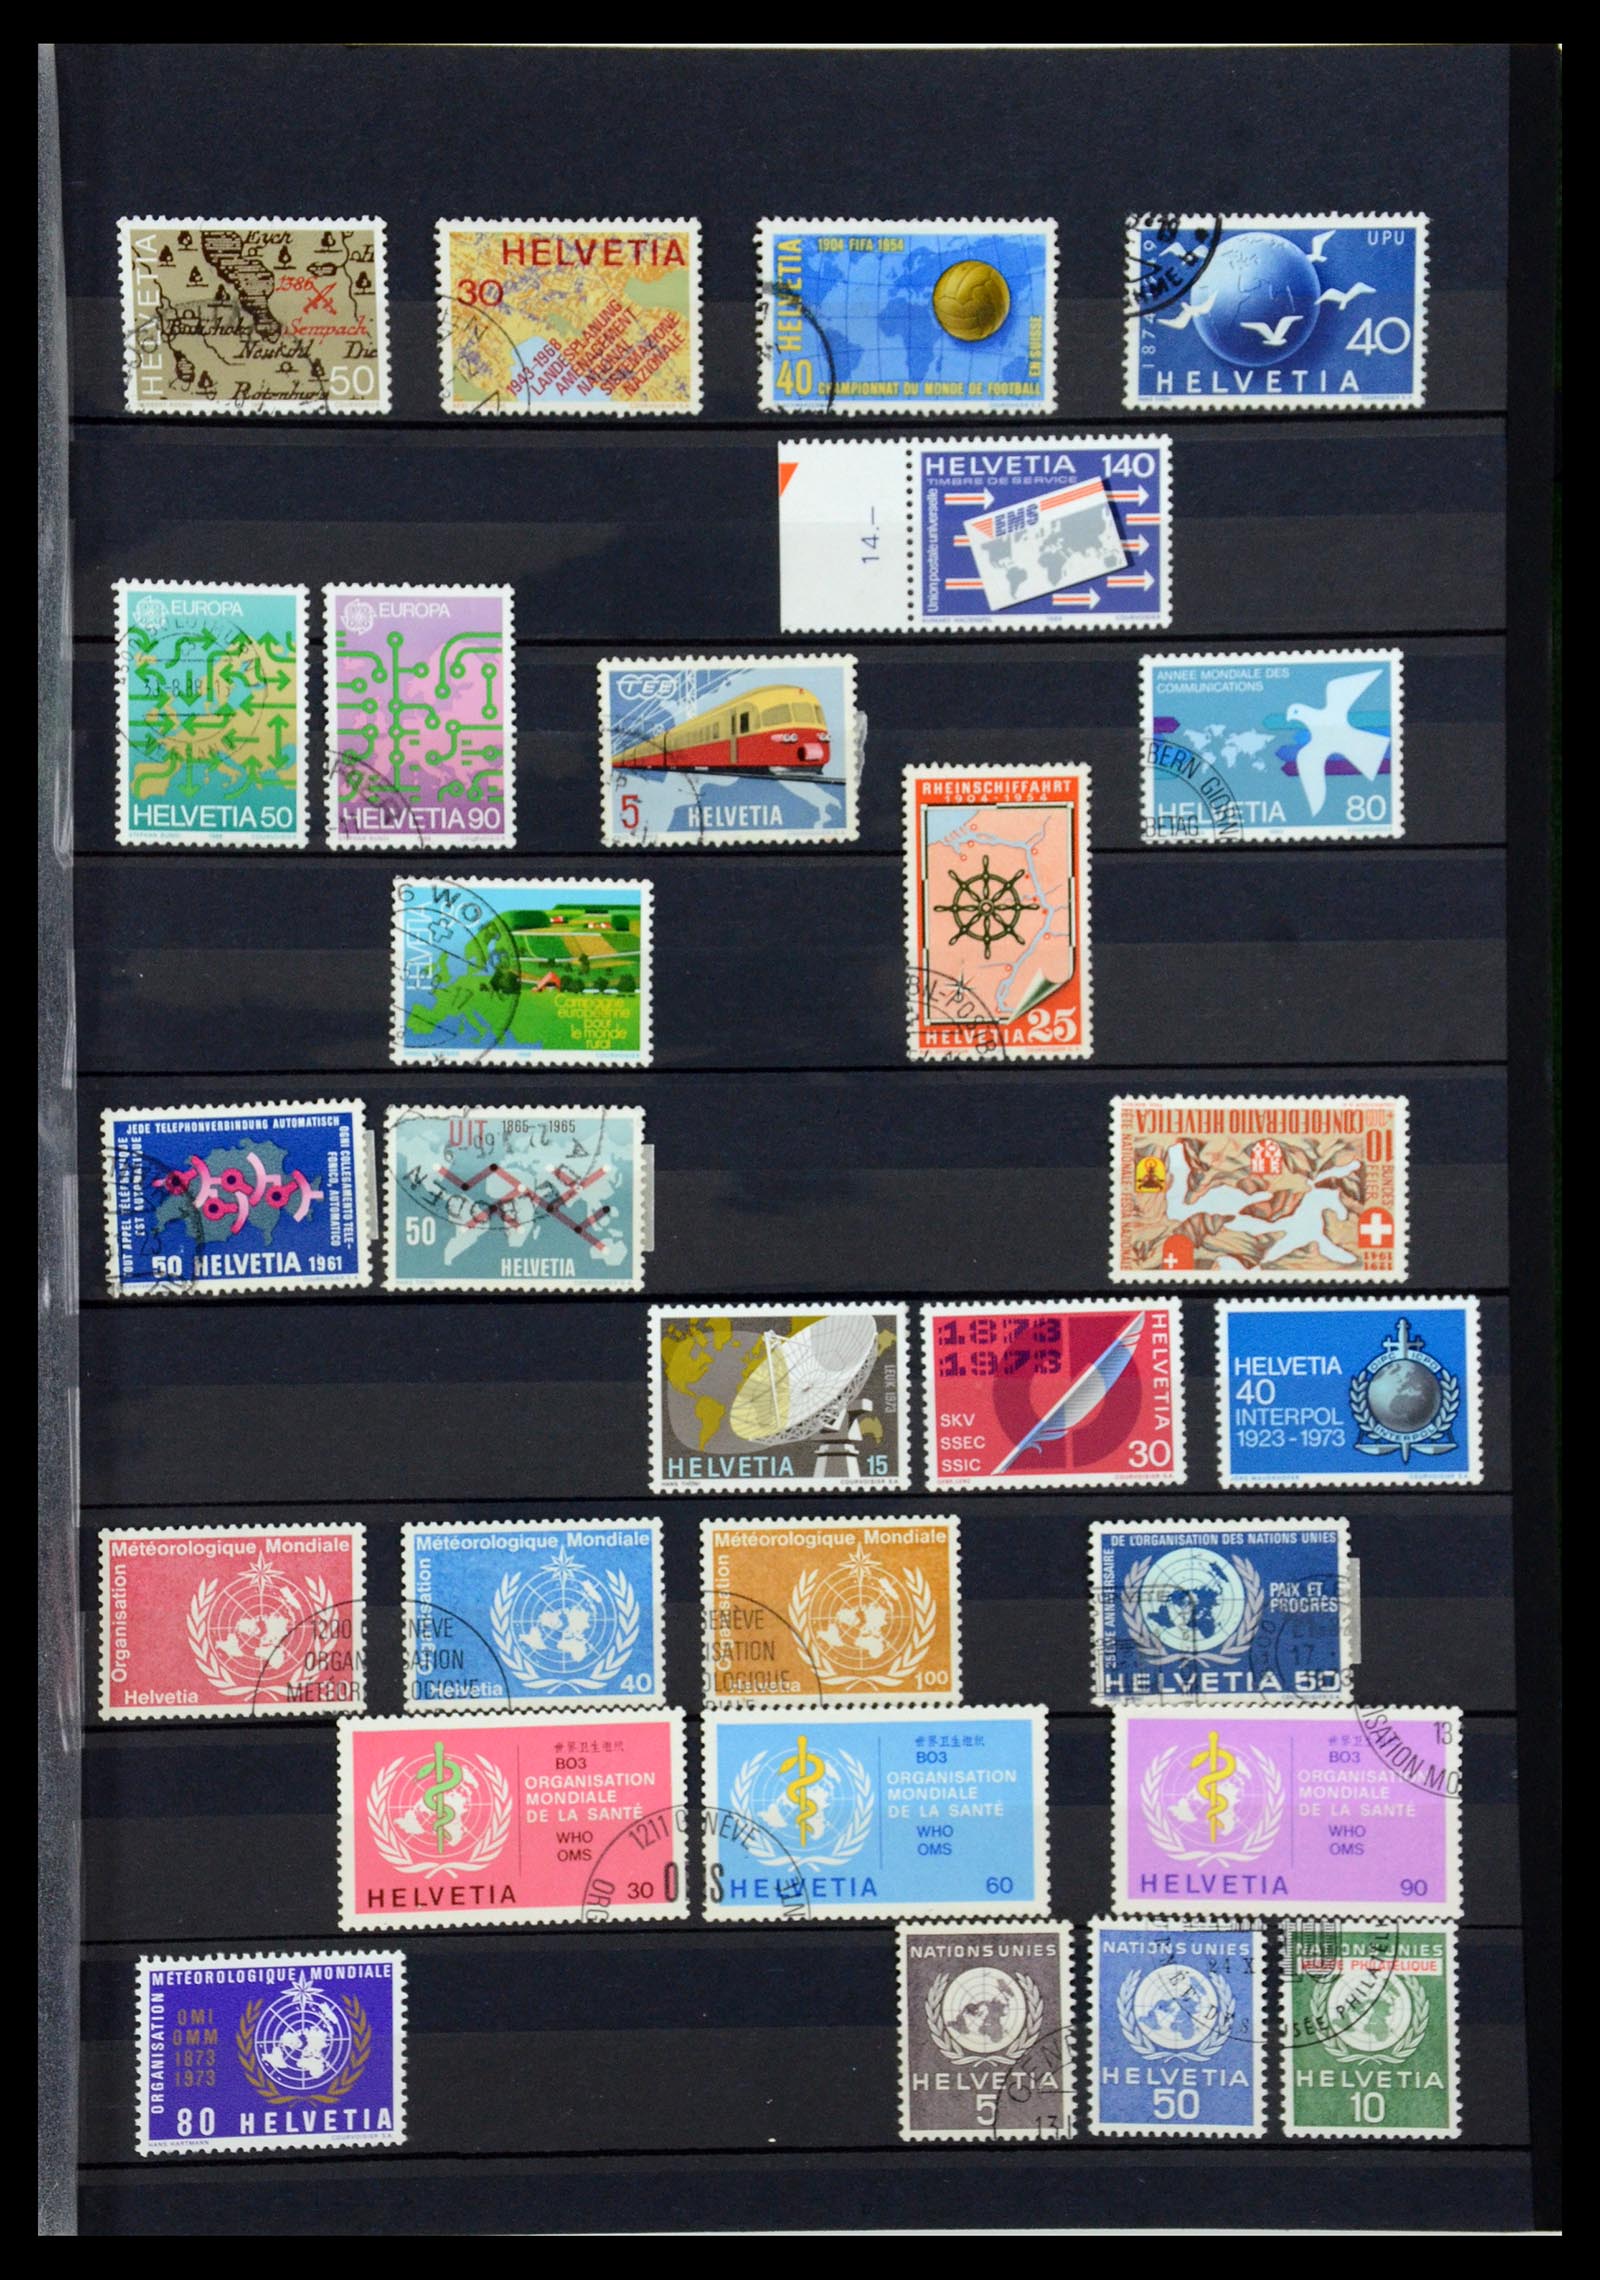 36238 017 - Stamp collection 36238 Motif maps 1900-2000.